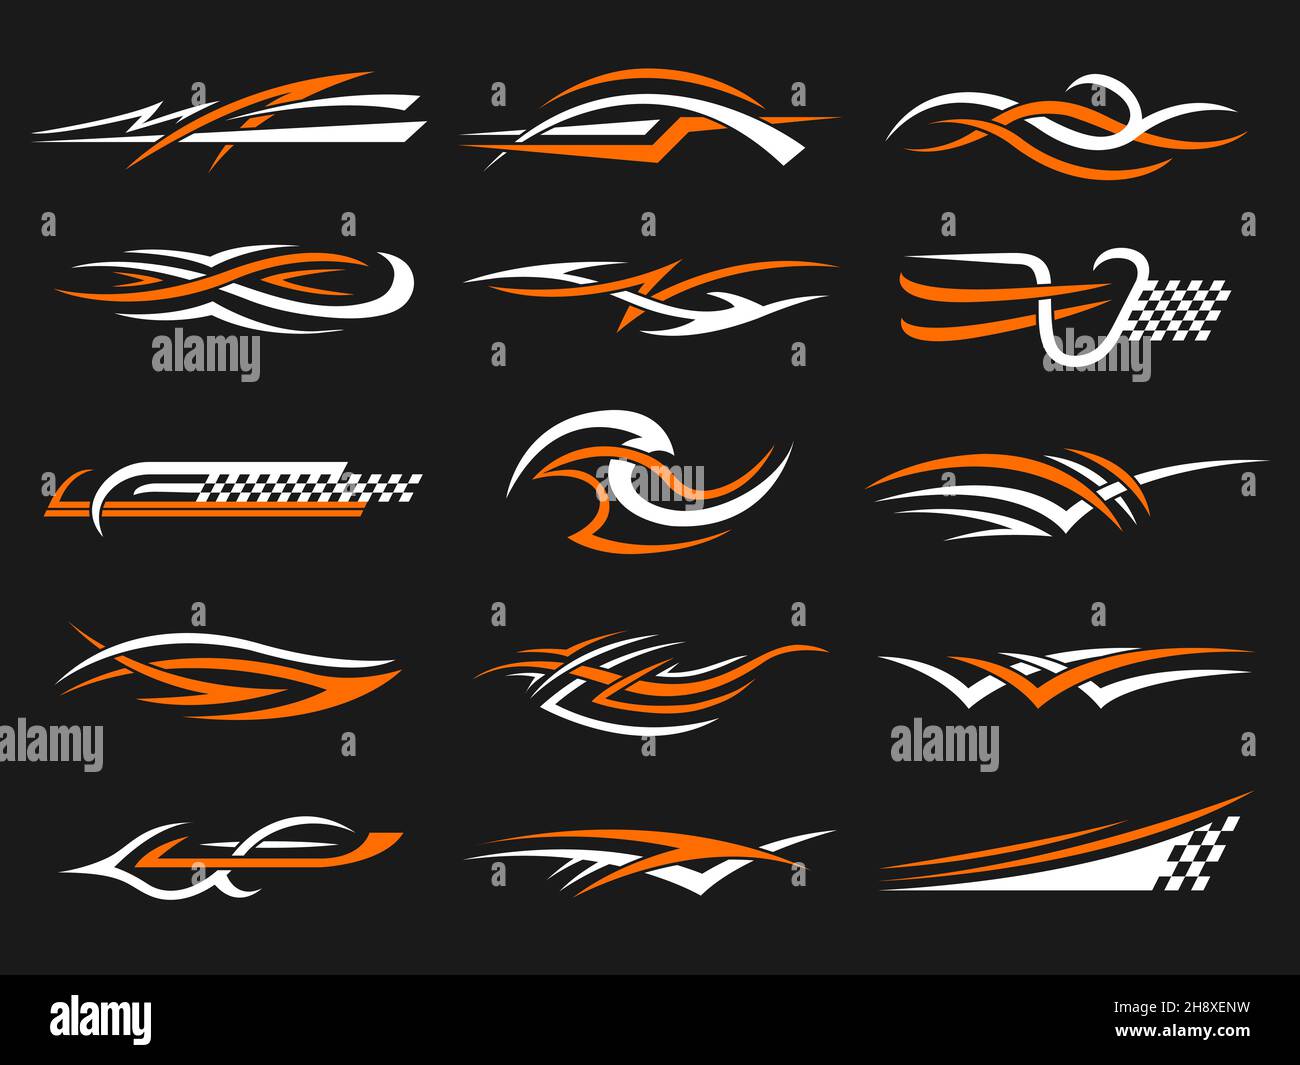 Car stripes. Vinyl stylized graphics templates symbols of flame geometrical shapes racing motorcycle club designs recent vector set Stock Vector